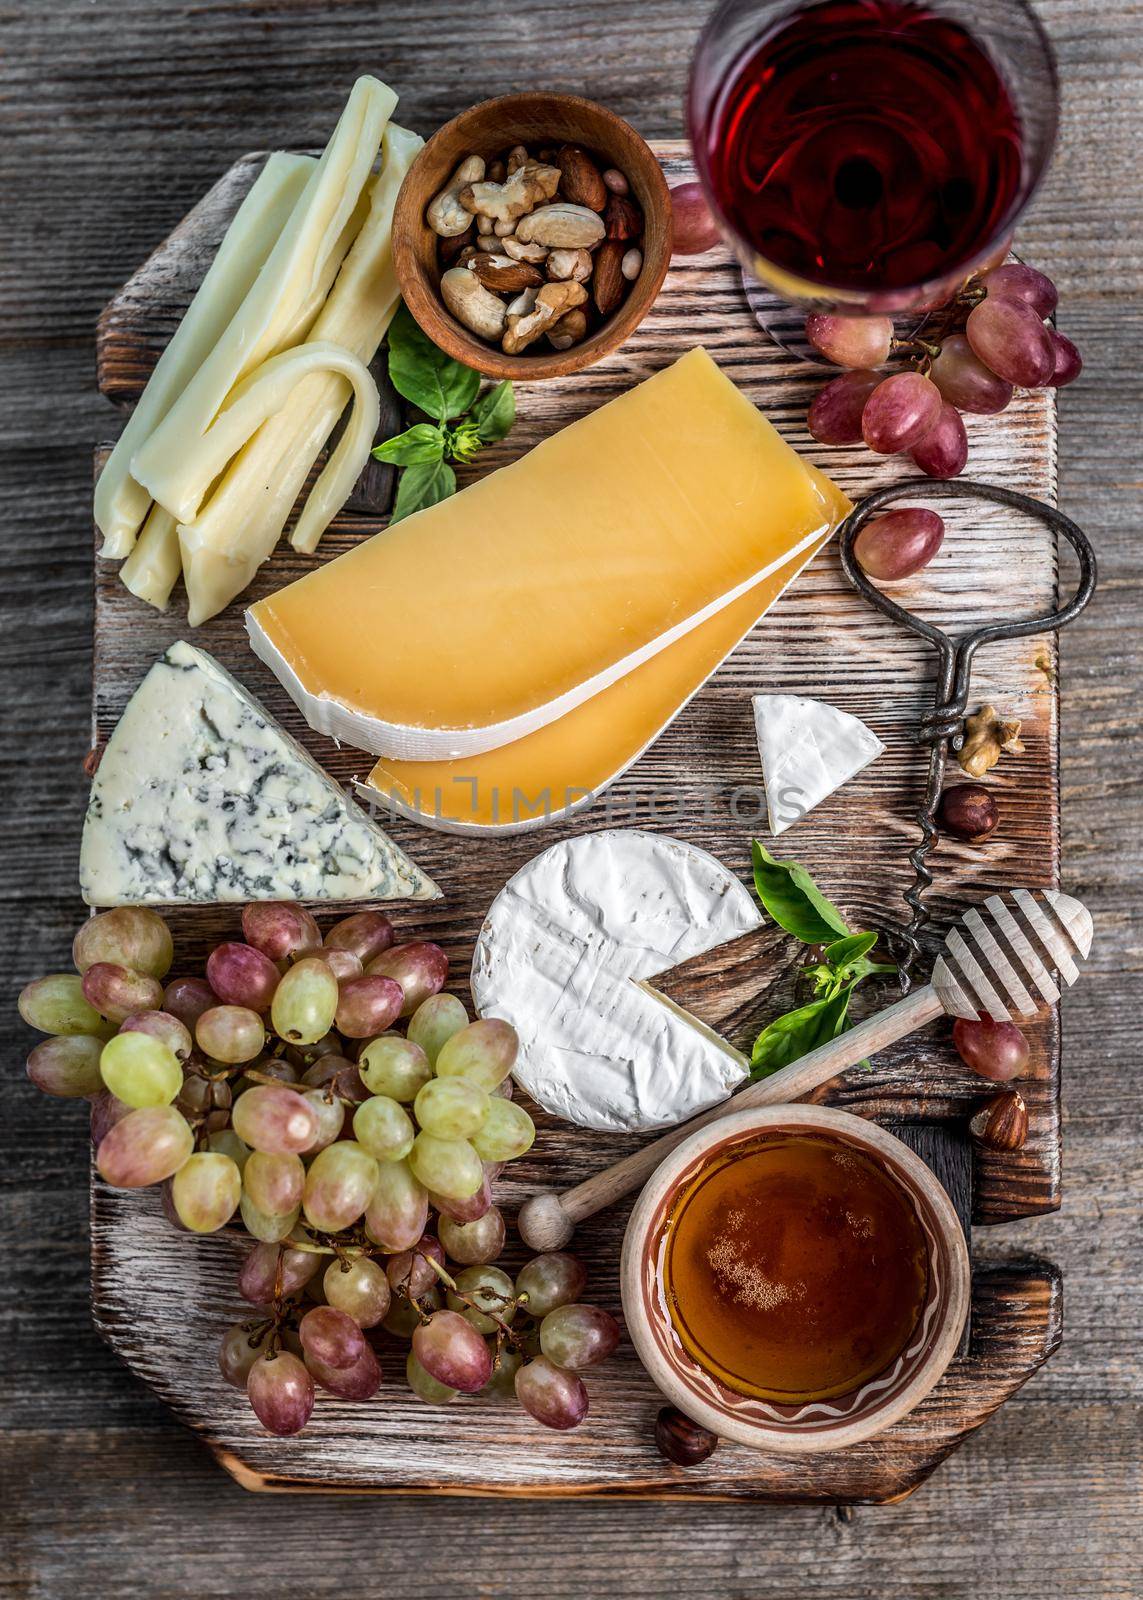 Cheese plate served with wine, nuts and honey by tan4ikk1